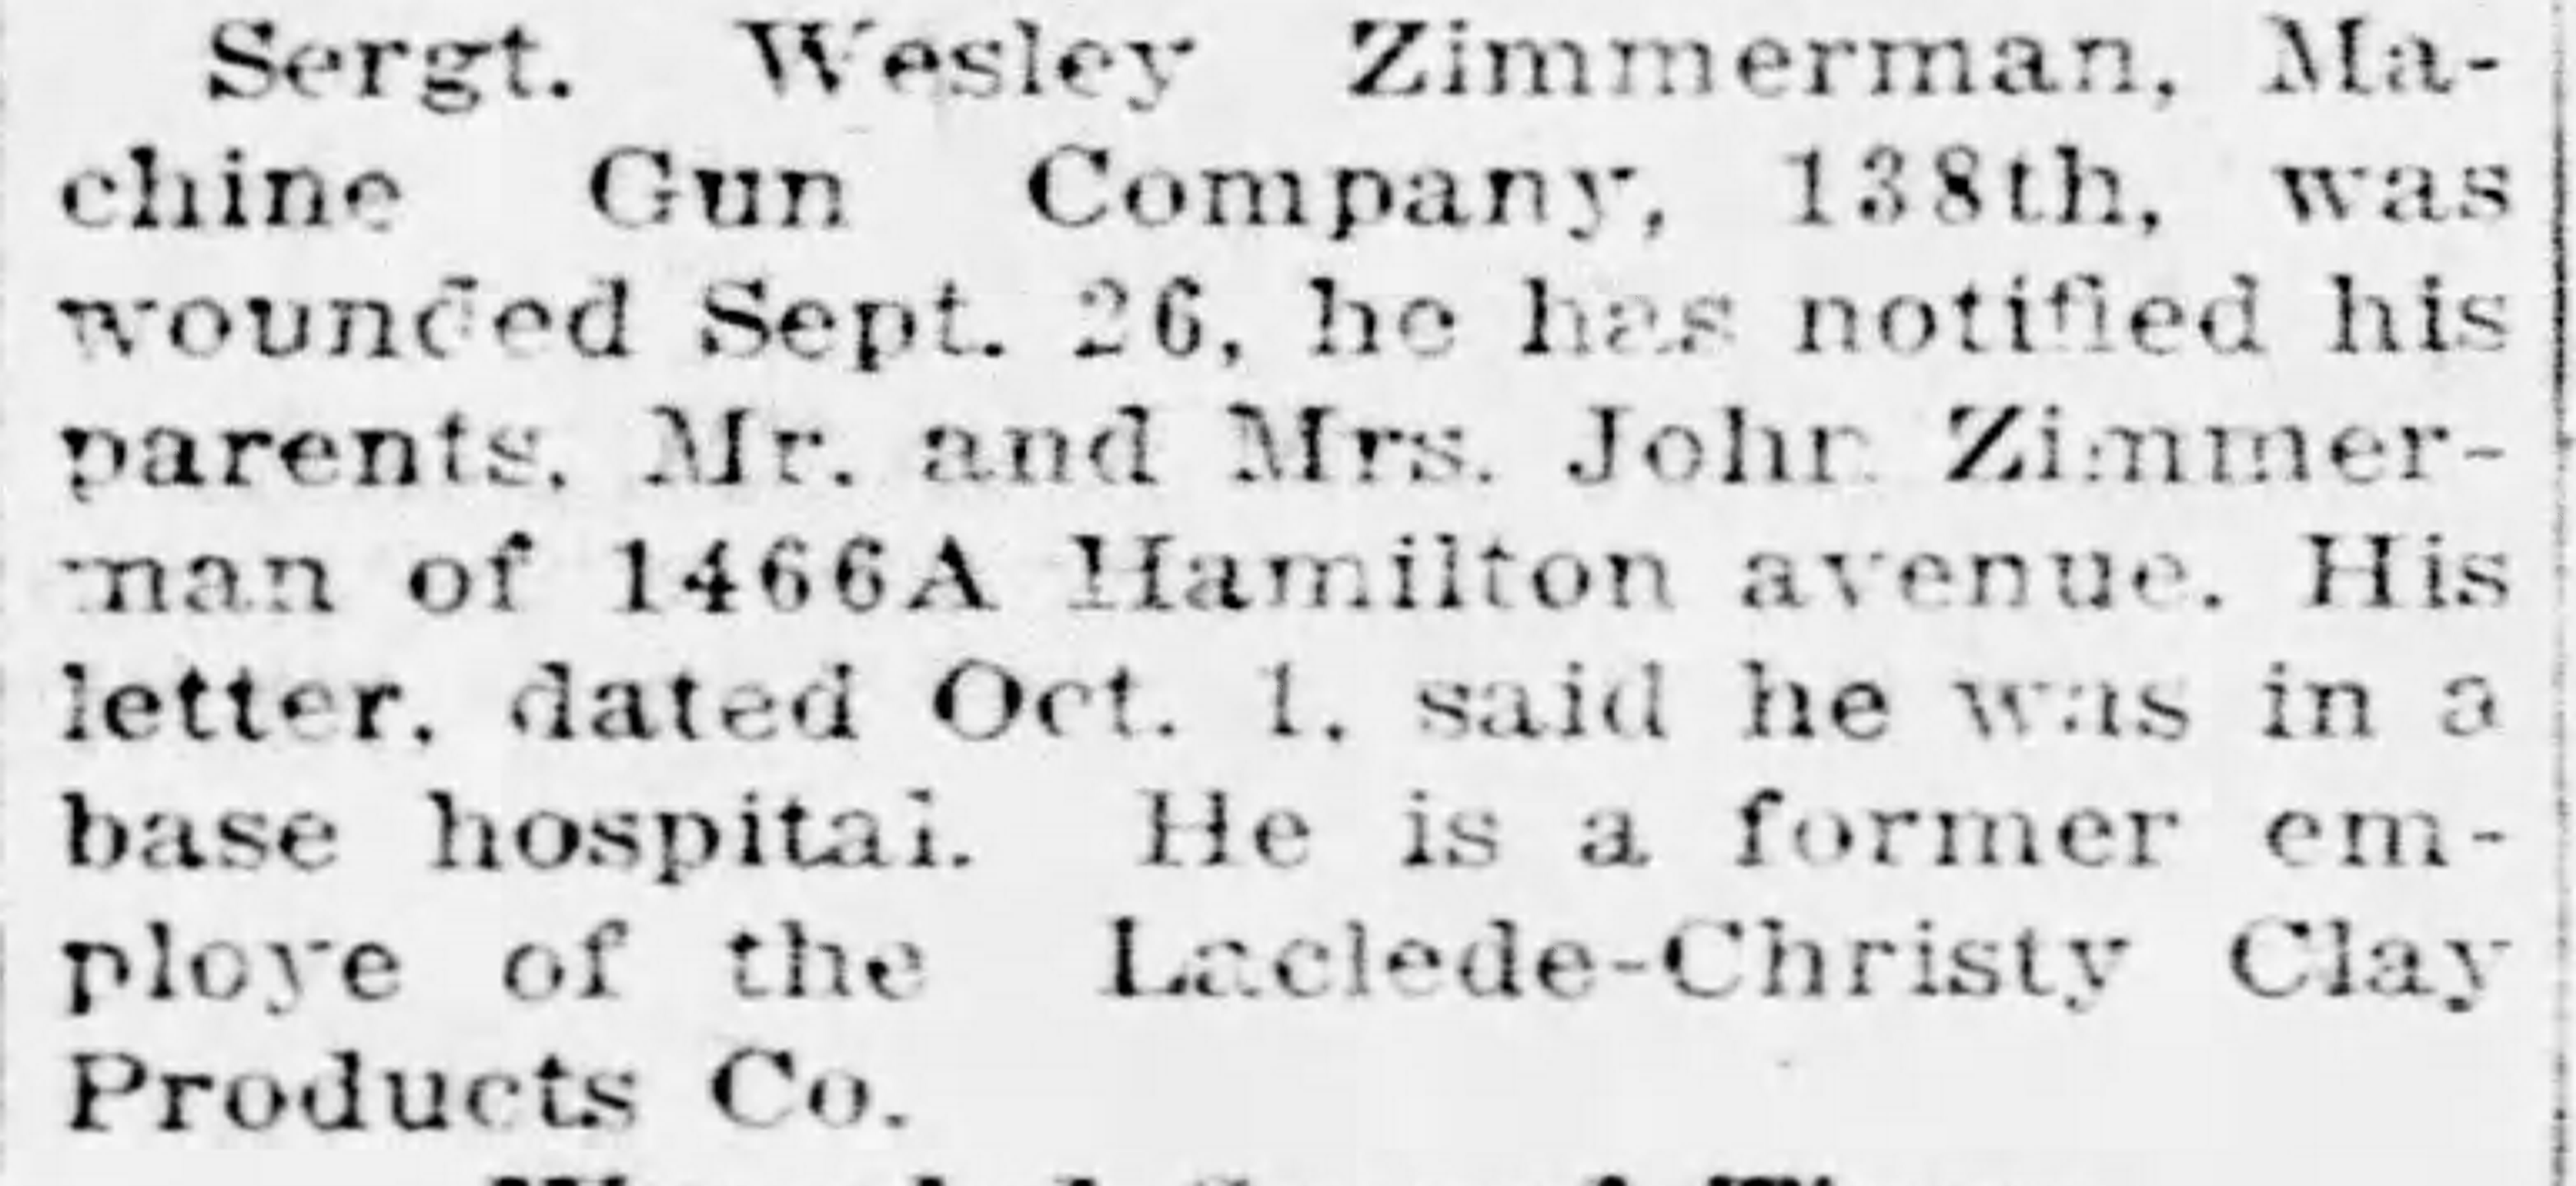 'Wesley Zimmerman Wounded,' St. Louis Post-Dispatch, October 22, 1918